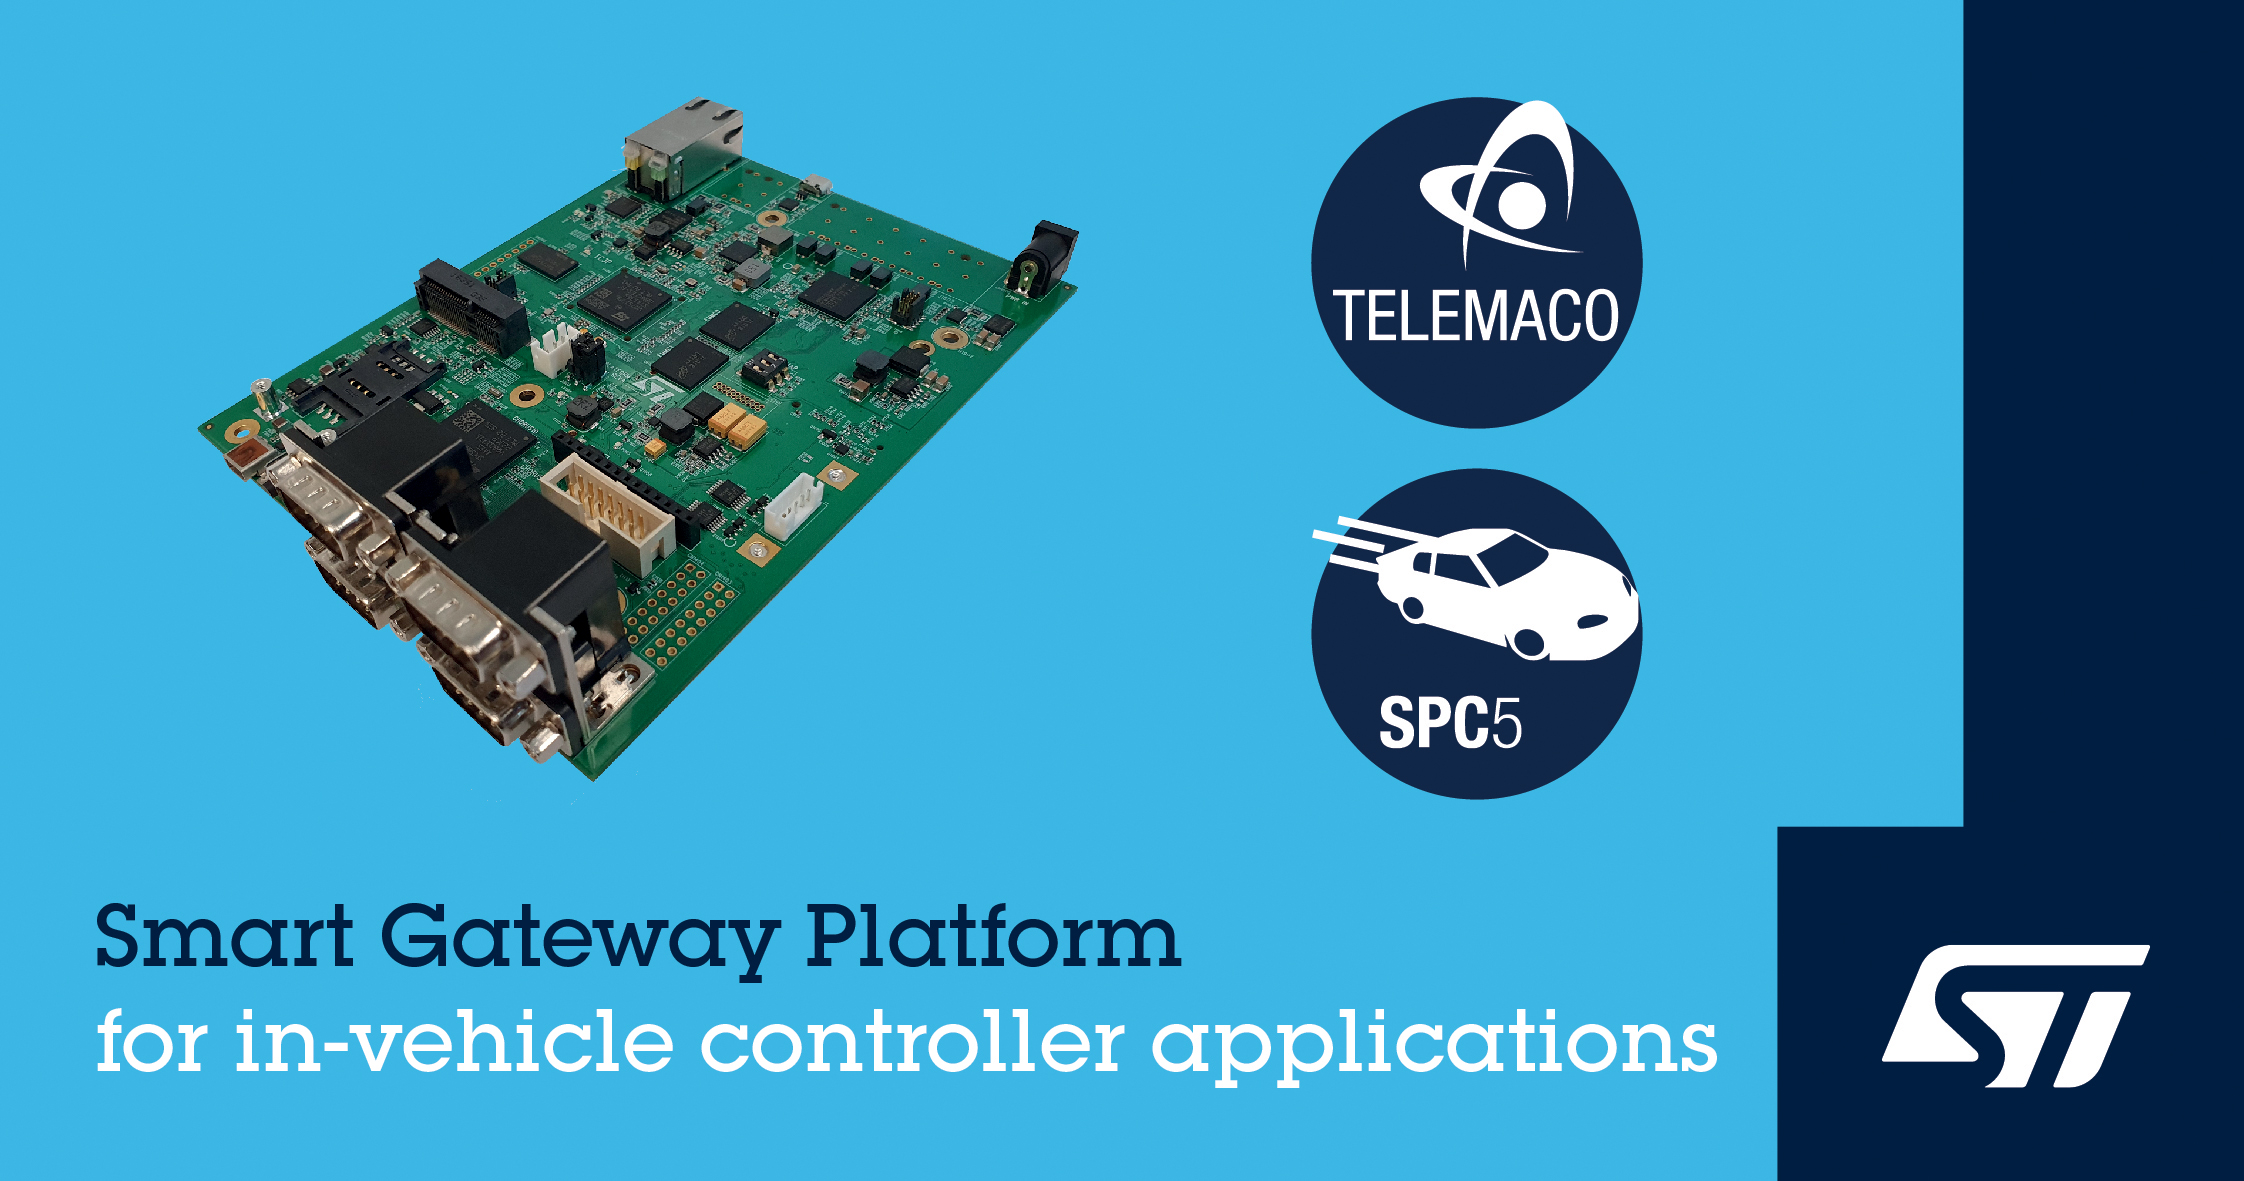 STMicroelectronics Launches Smart Gateway Platform for Automotive Gateway and Domain Controller Applications